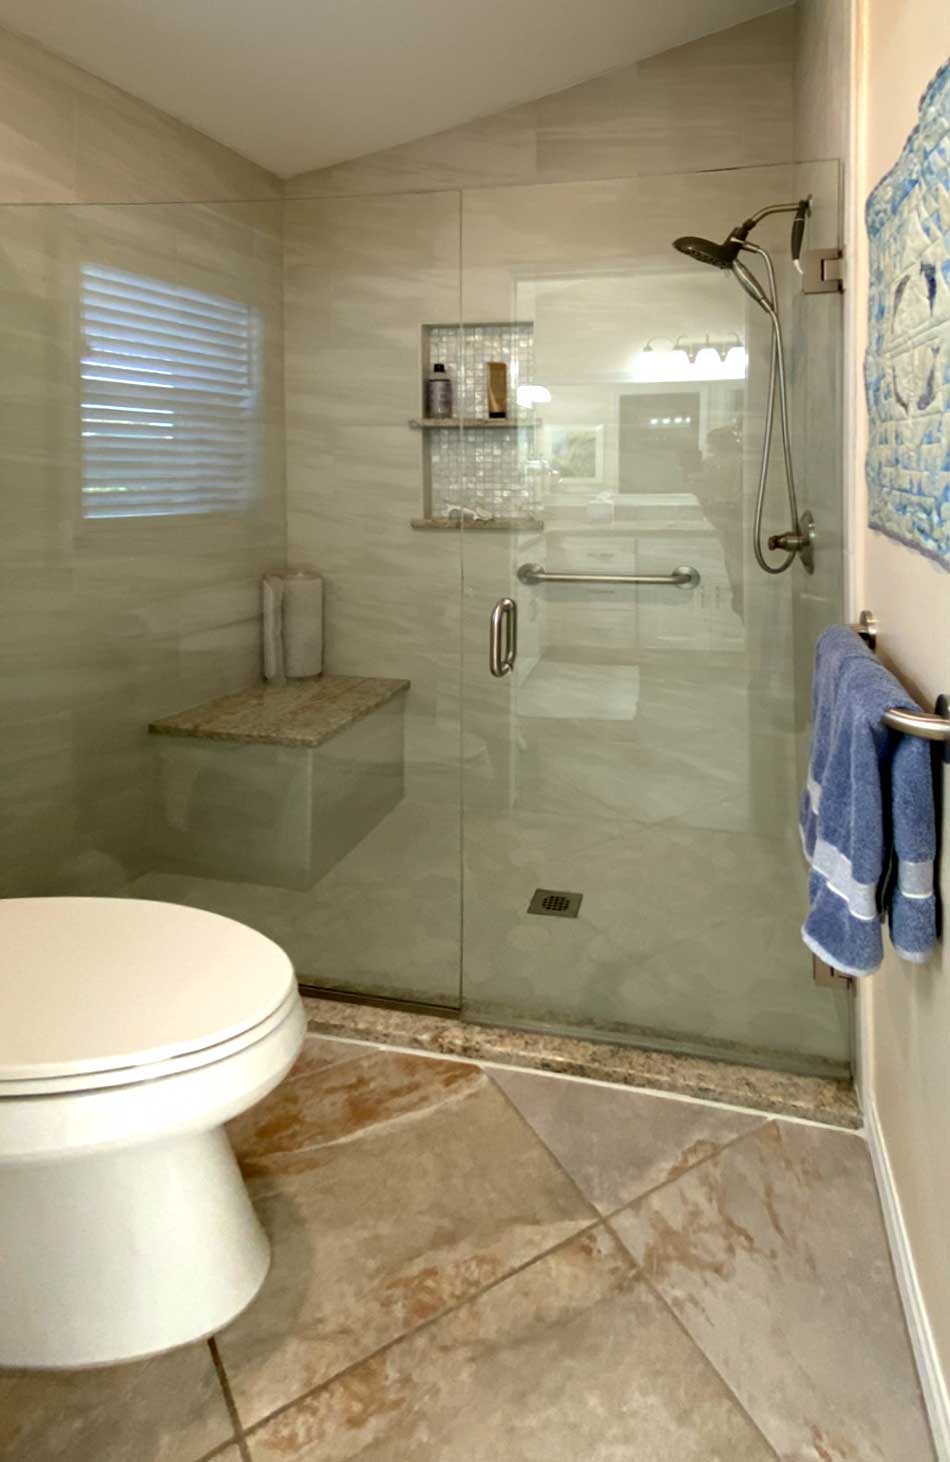 New shower stall looks so tall - Home Décor by Ruth Dyer - in the Villages of Florida.